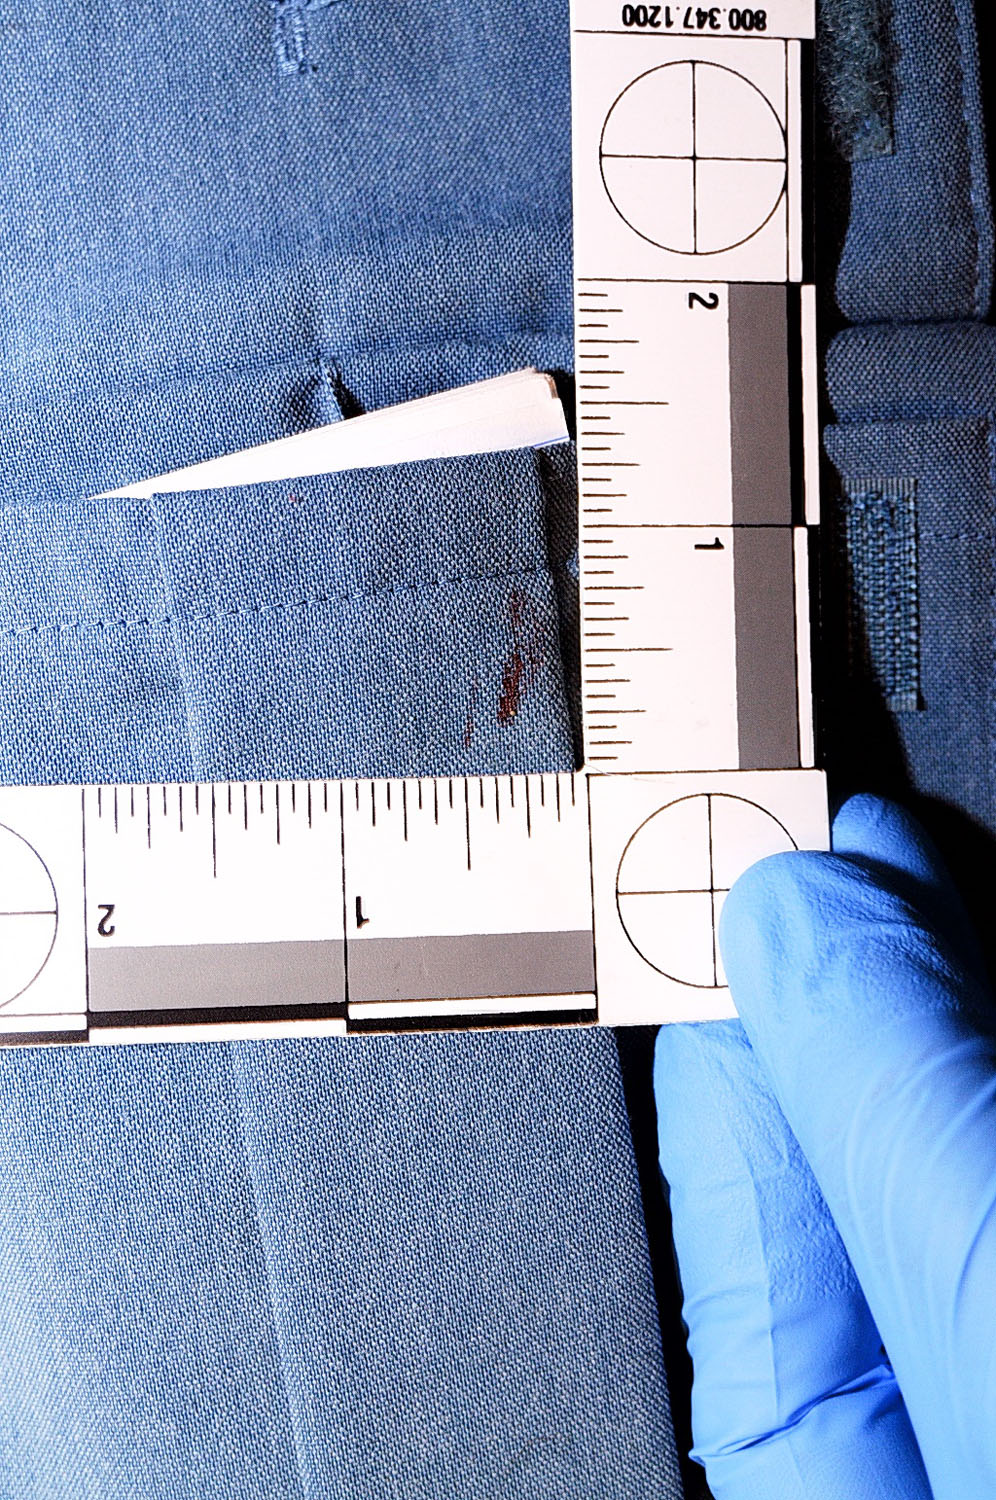 Evidence left on the breast pocket of Wilson's uniform following the shooting of Michael Brown